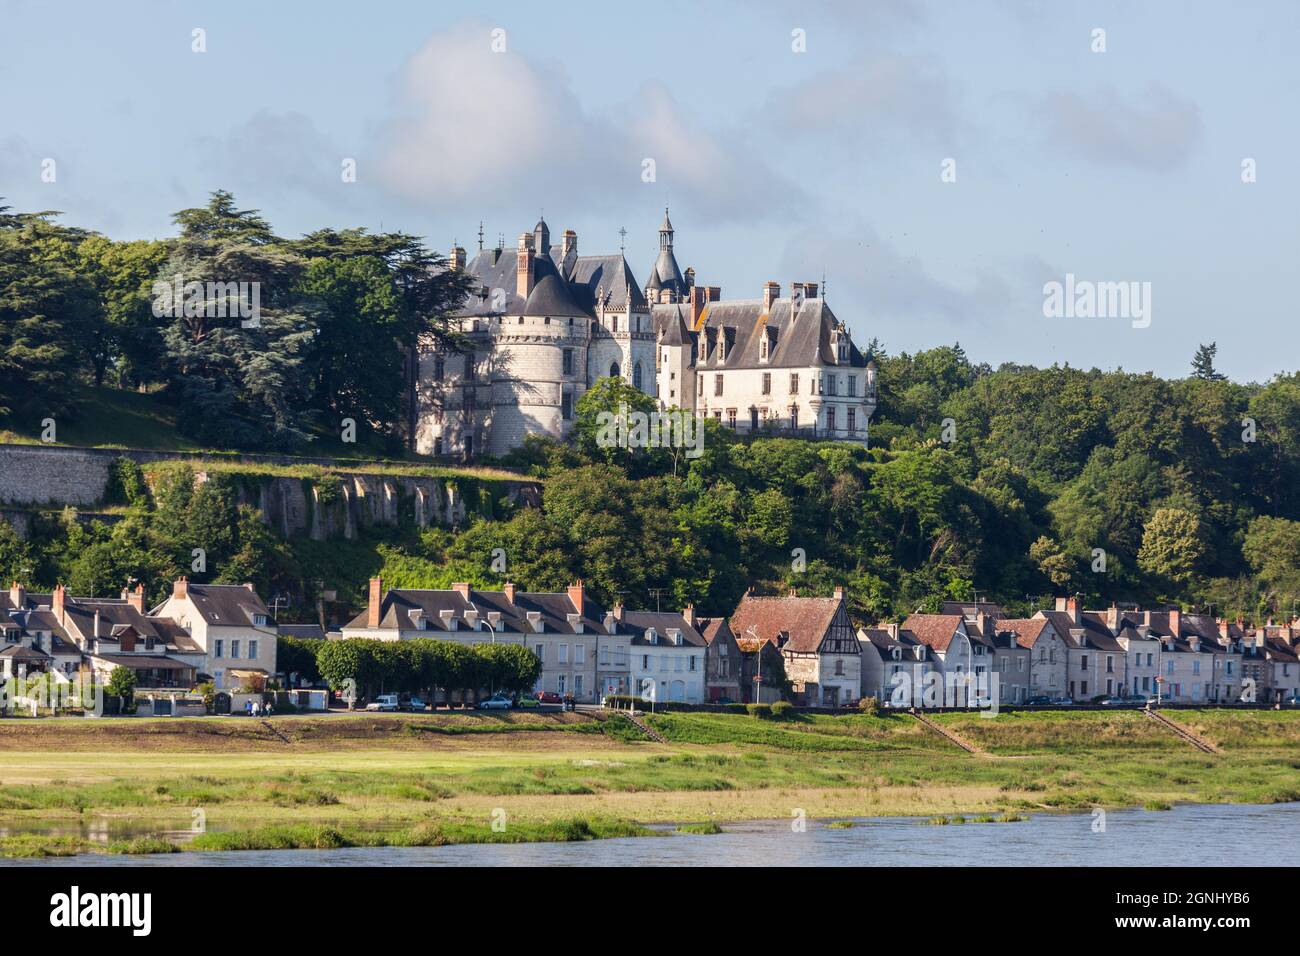 Blois is a commune and the capital city of Loir-et-Cher department in Centre-Val de Loire, France, situated on the banks of the lower river Loire betw Stock Photo